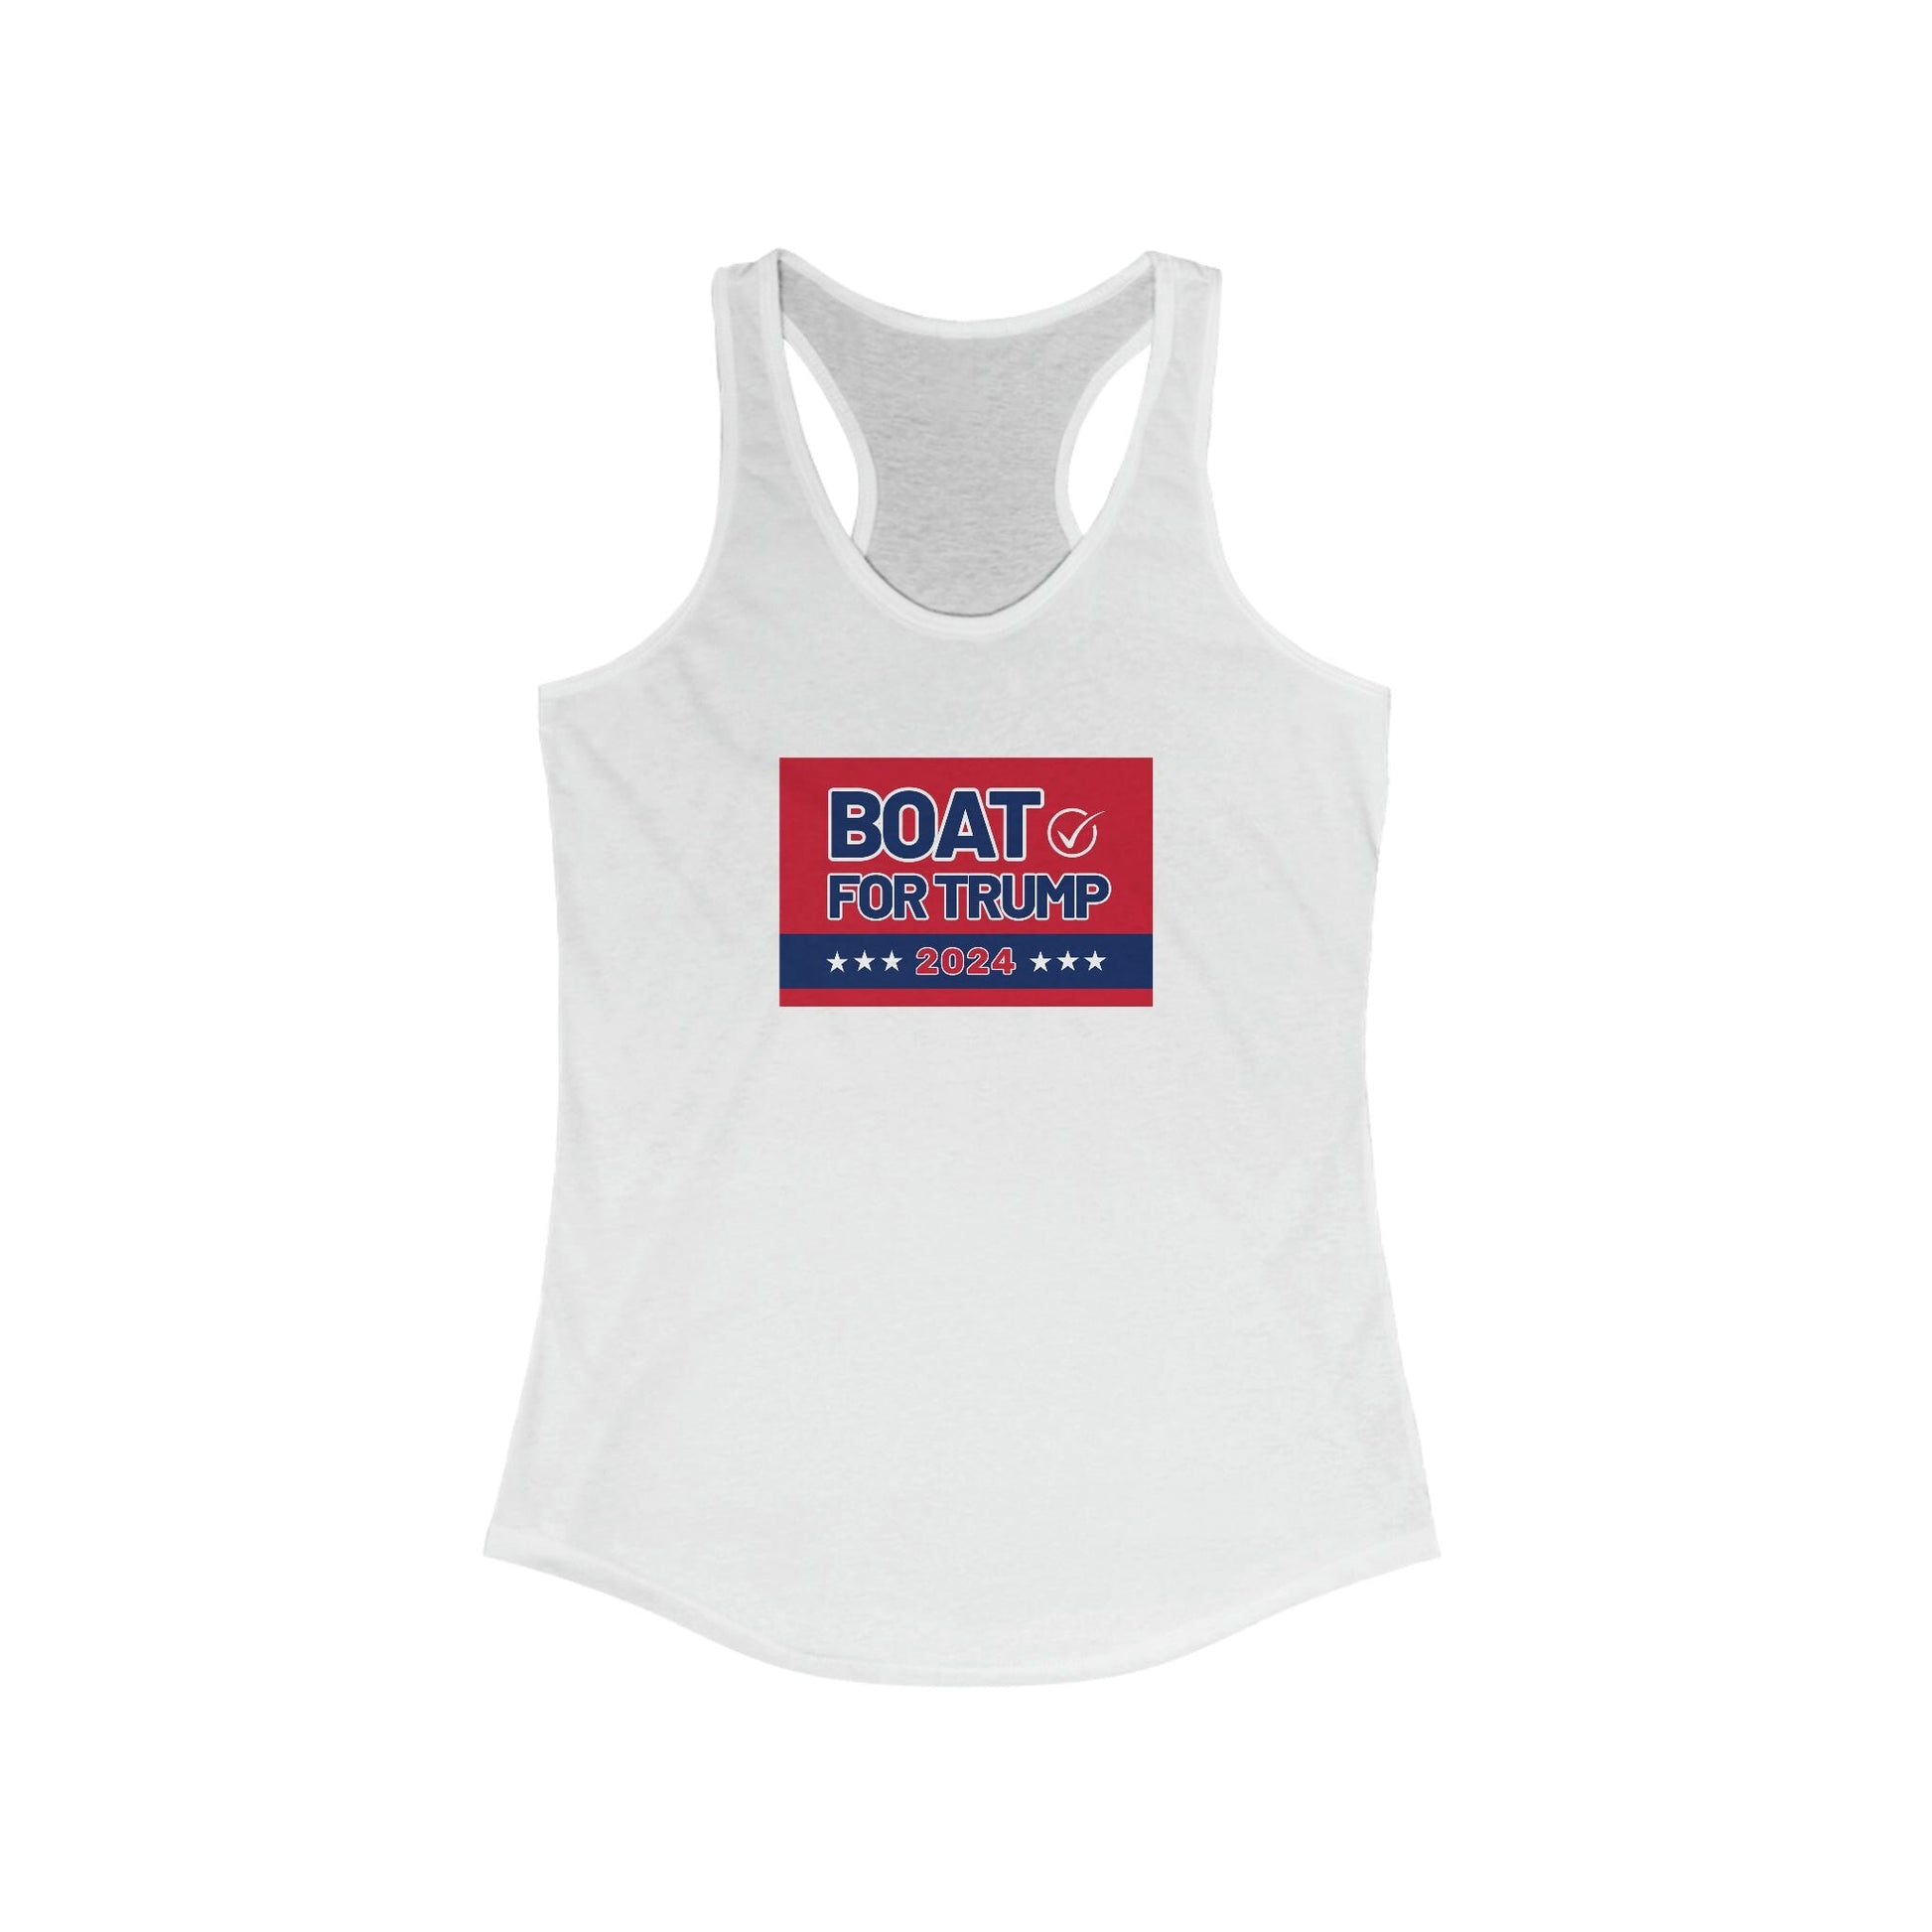 BOAT FOR TRUMP - High Quality Tank Top (Women, Red Logo)